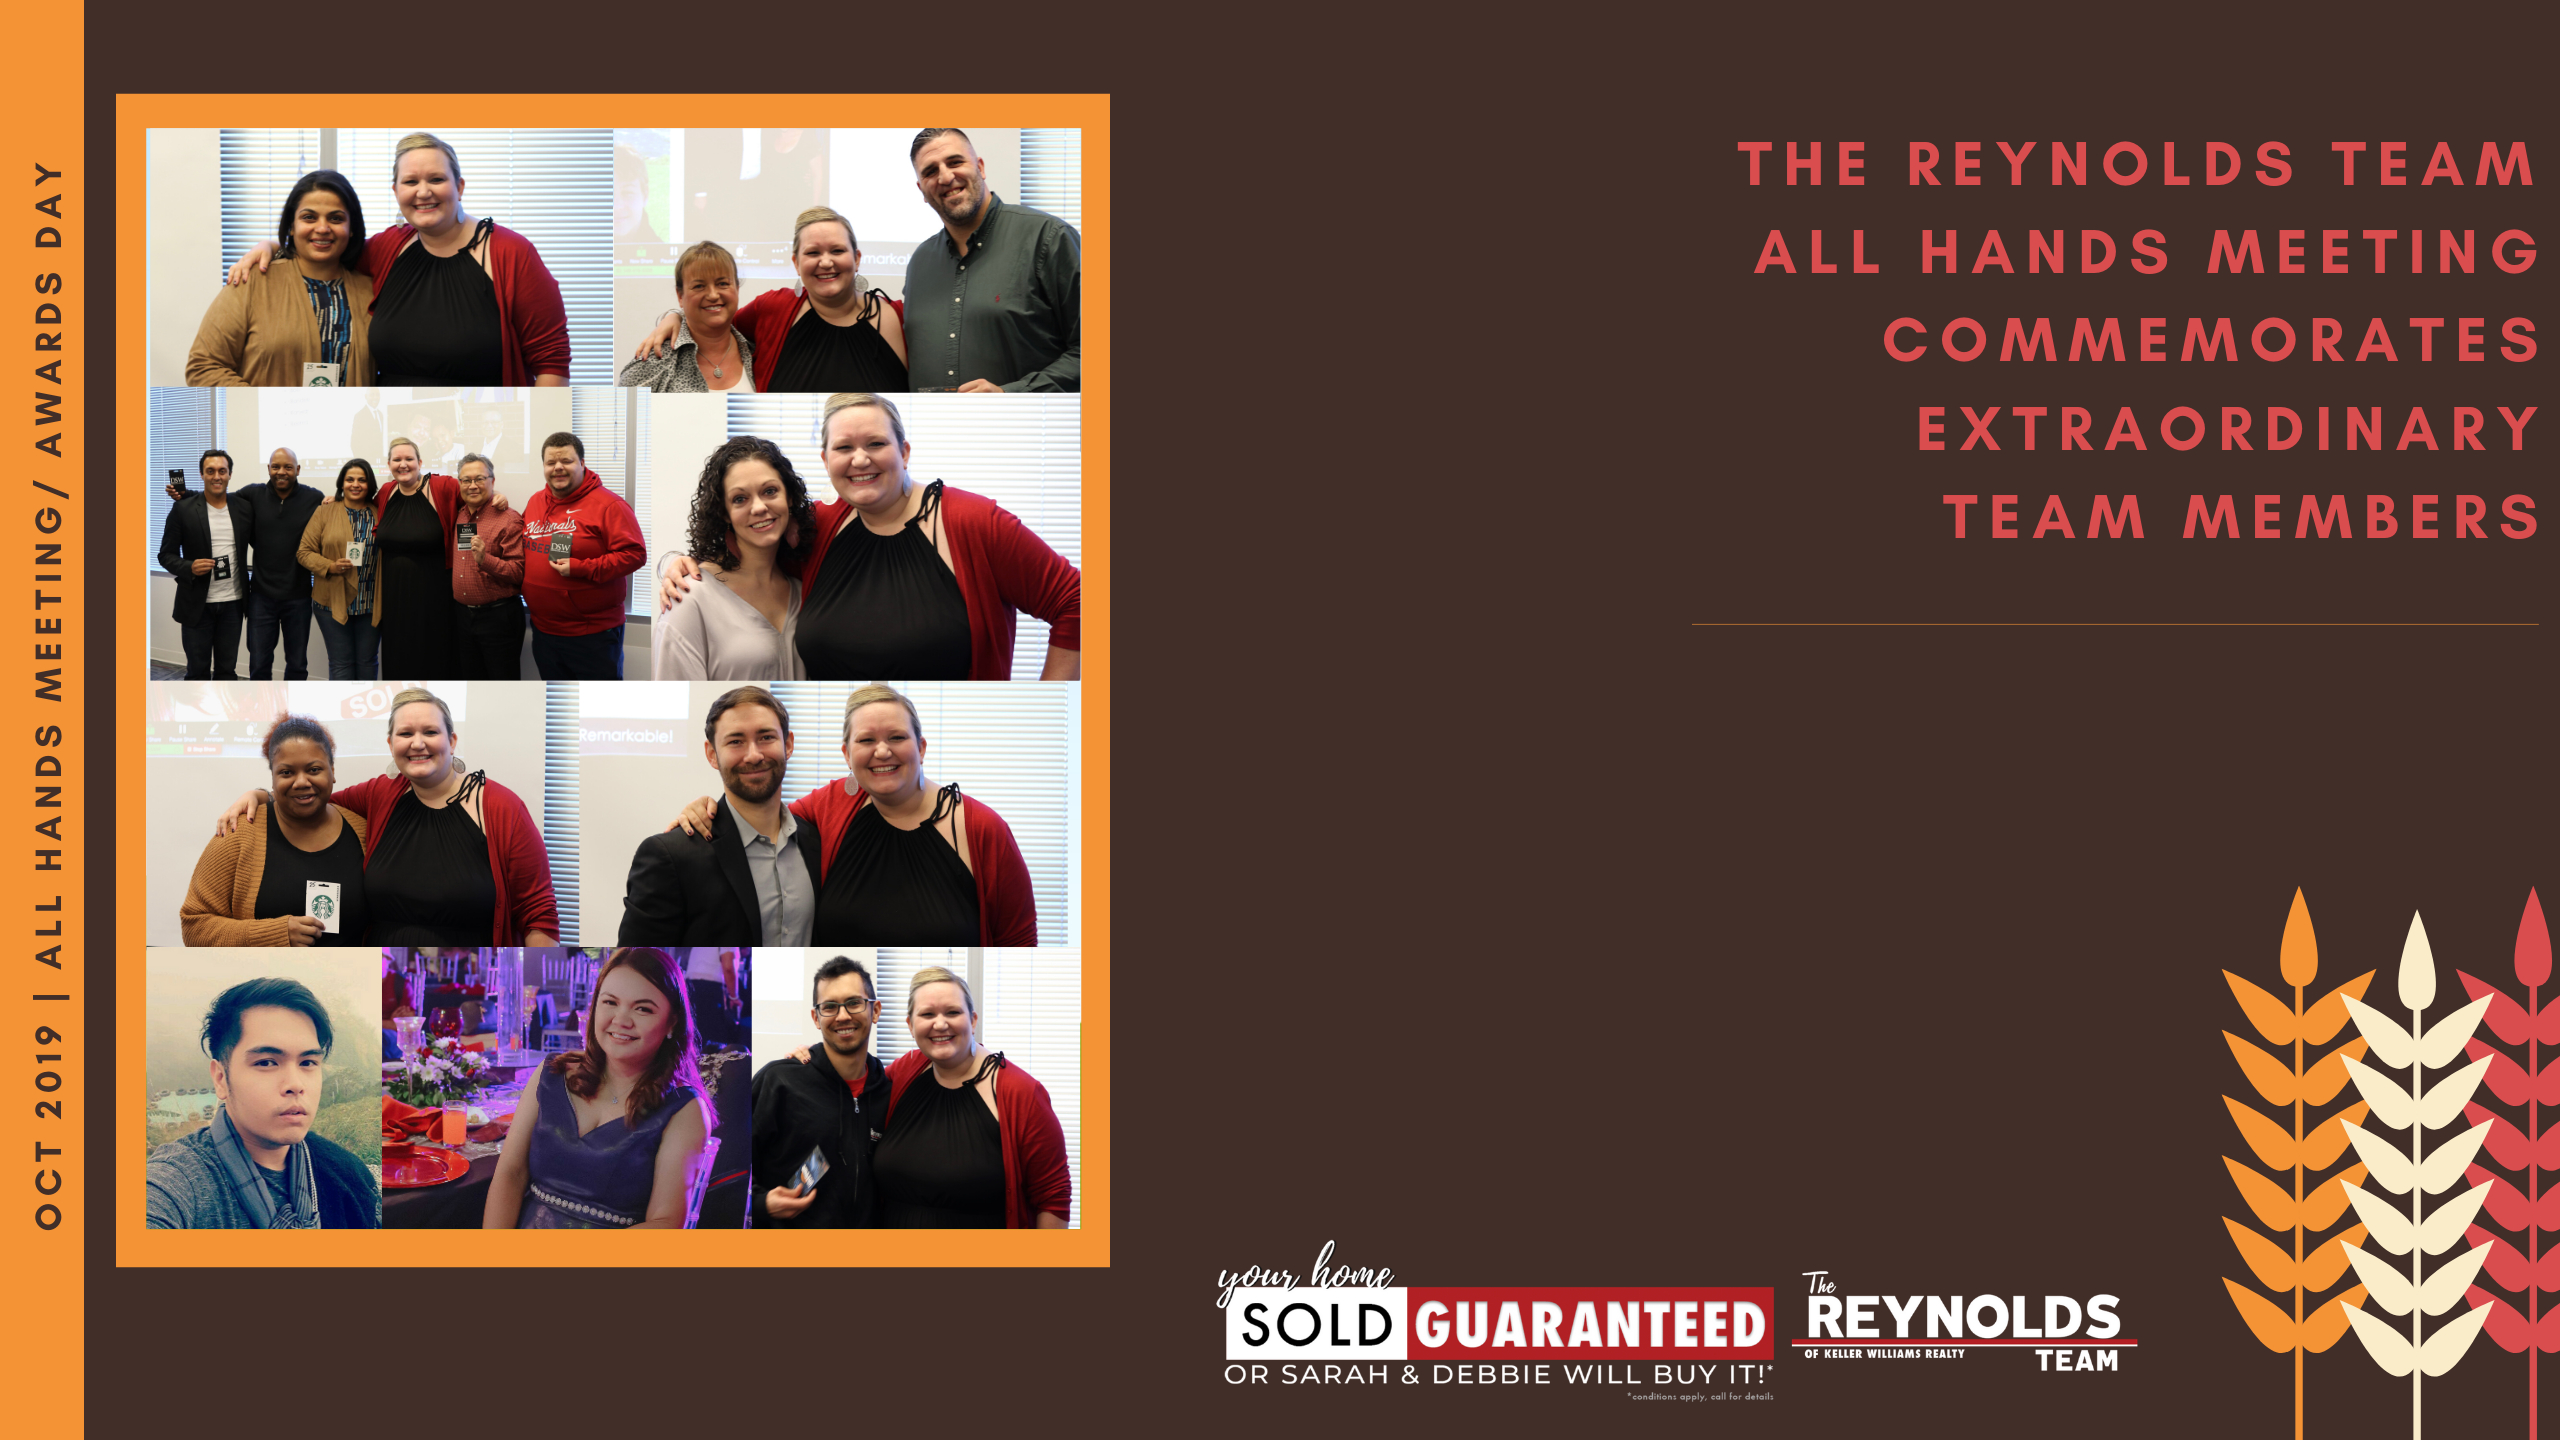 The Reynolds Team All Hands Meeting Commemorates Extraordinary Team Members